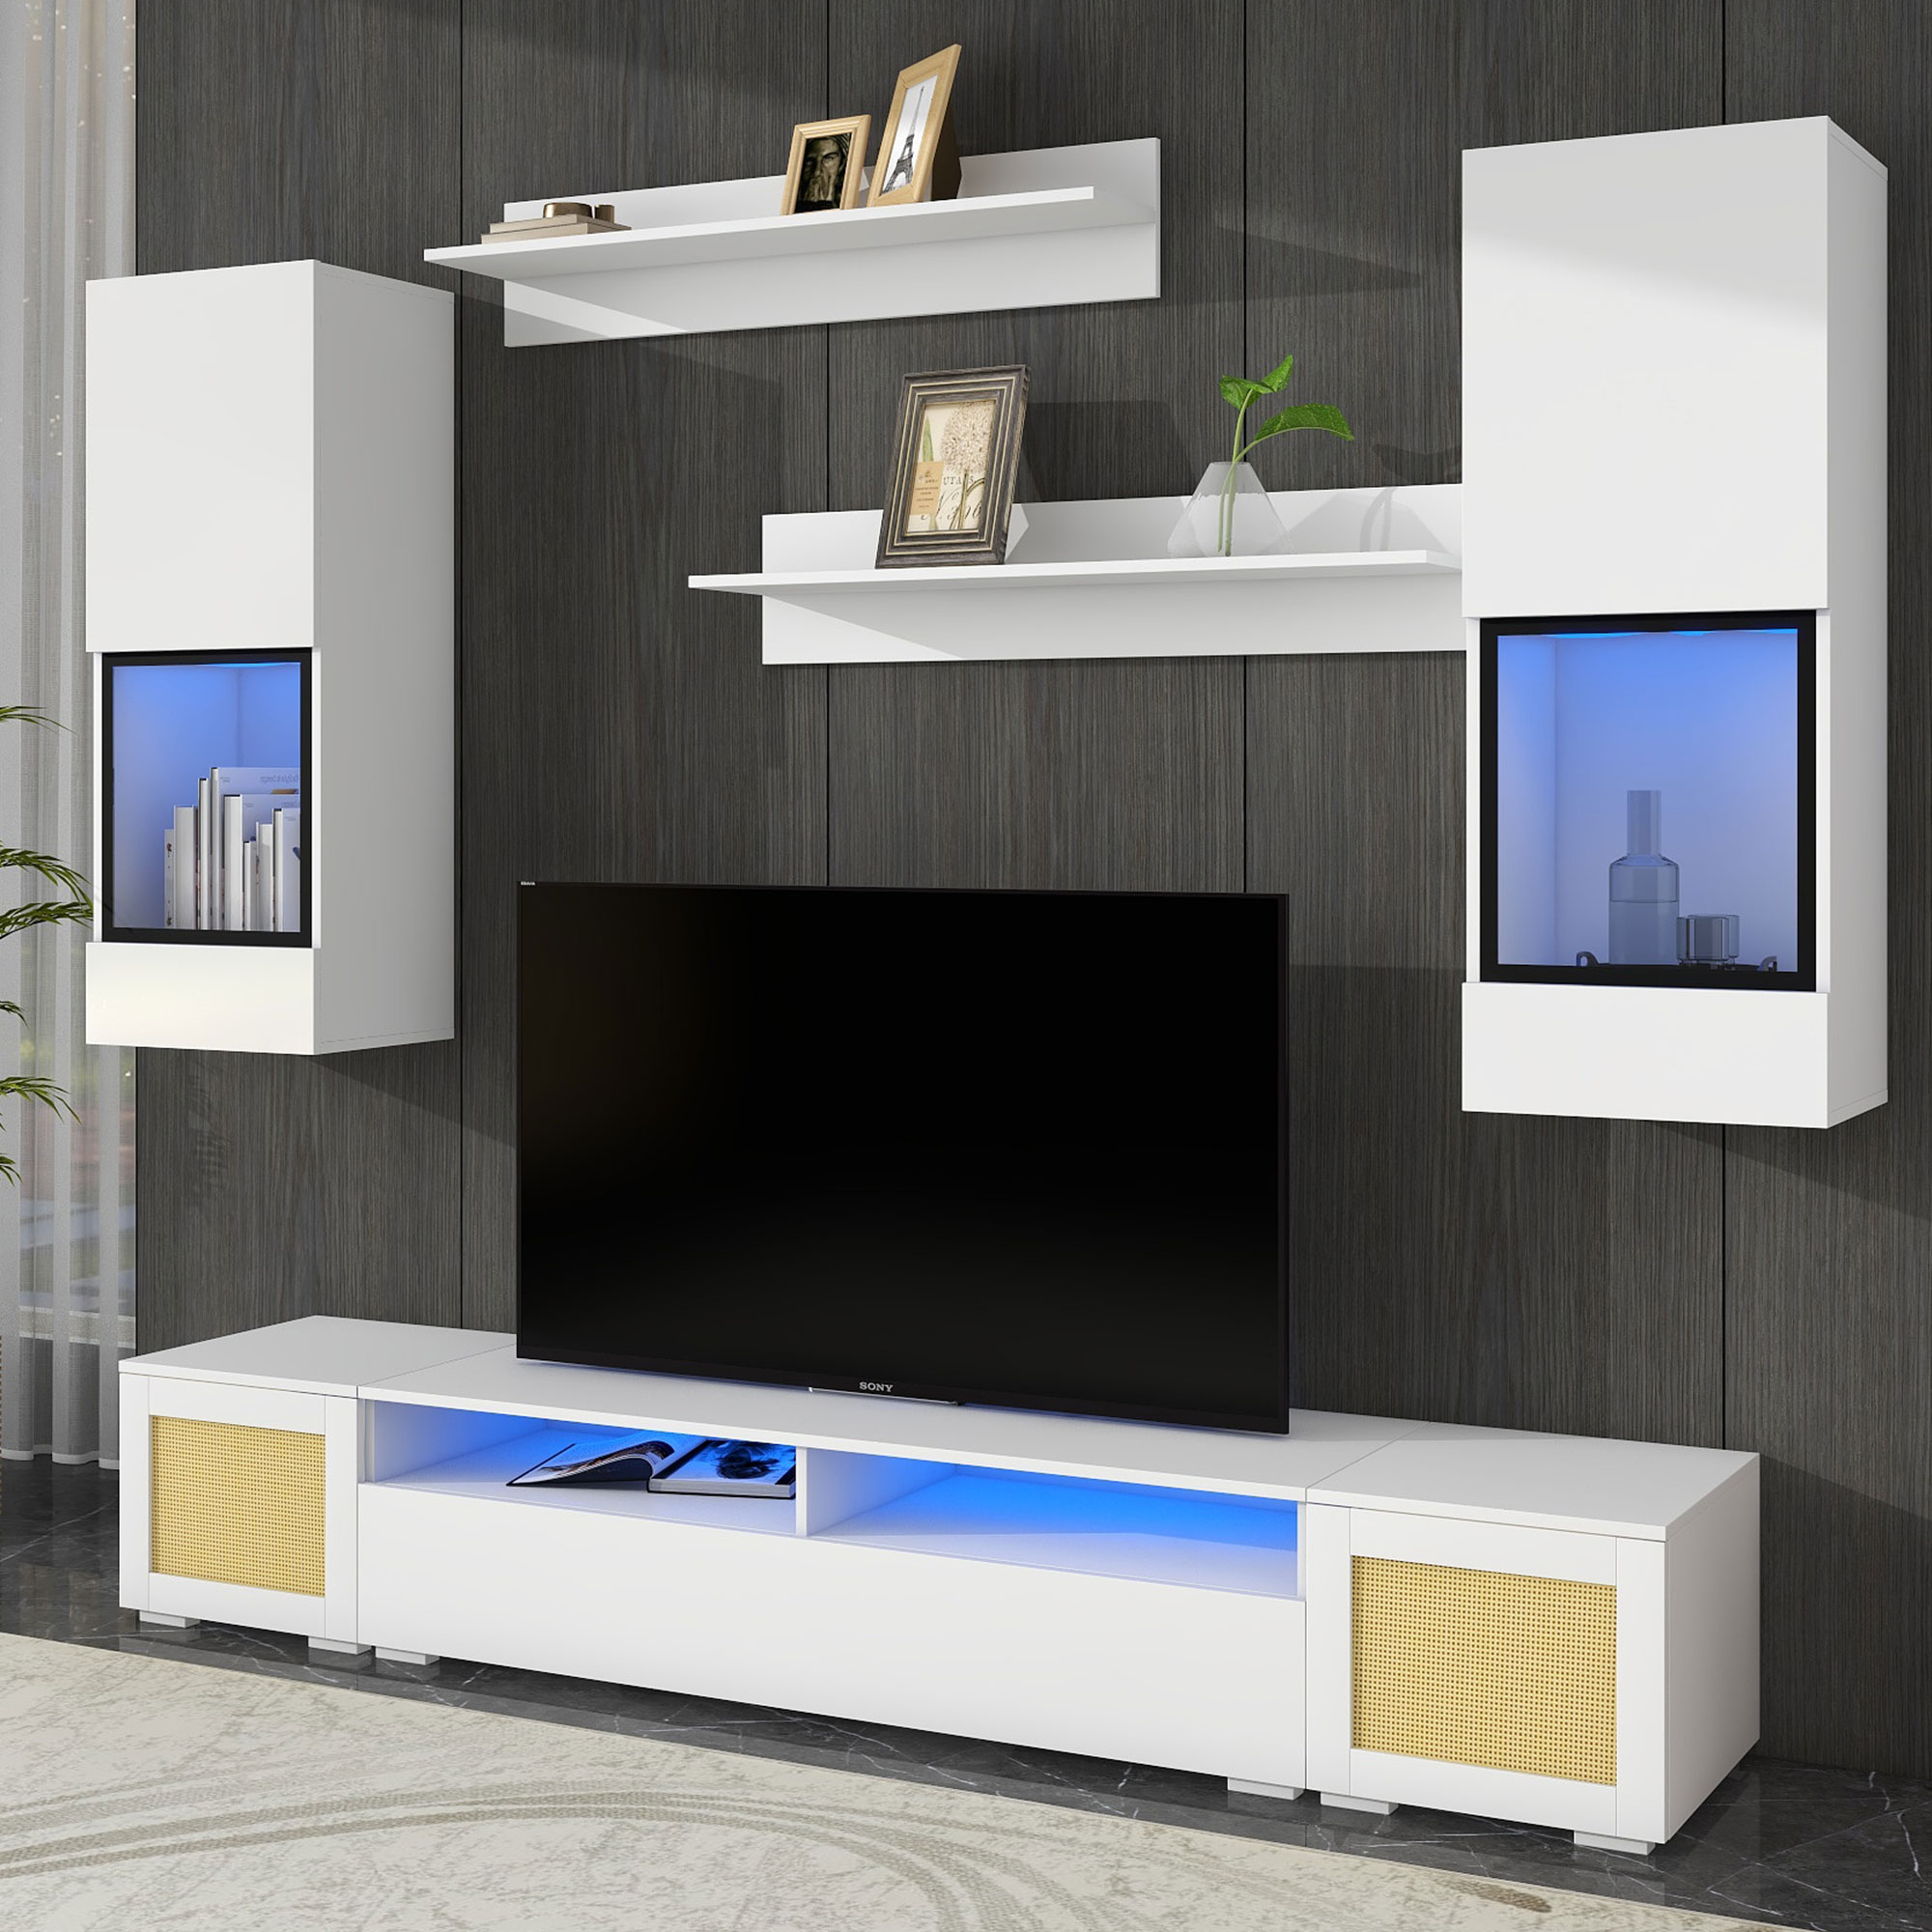 ON-TREND Extended, Rattan Style Entertainment Center, 7 Pieces Floating TV Console Table for TVs Up to 90”, High Gloss Wall Mounted TV Stand with Color Changing LED Lights for Home Theatre, White.